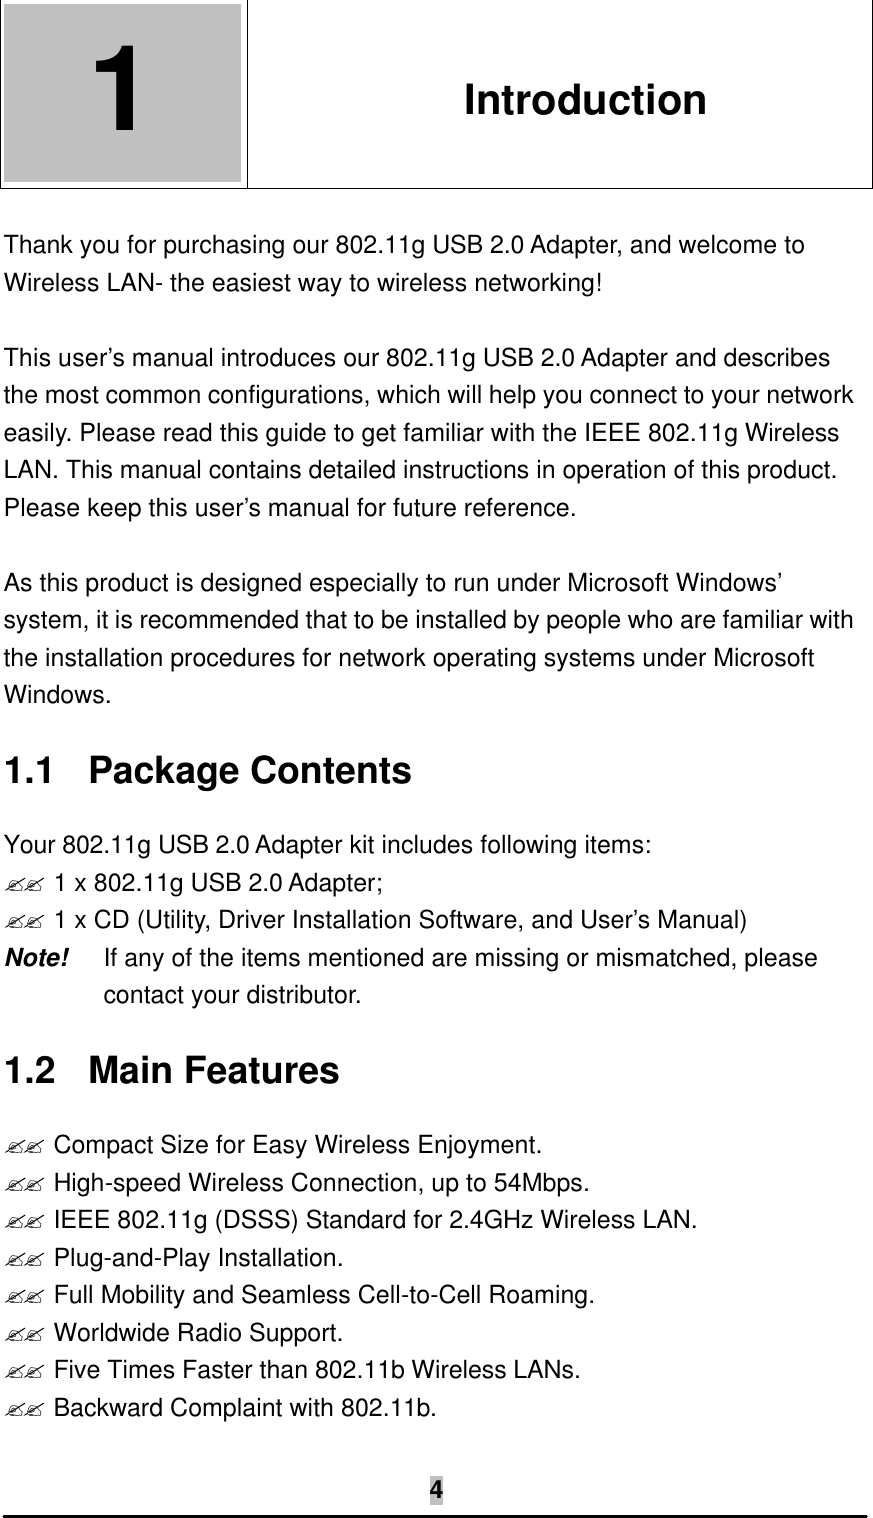   4 1  1. Introduction  Thank you for purchasing our 802.11g USB 2.0 Adapter, and welcome to Wireless LAN- the easiest way to wireless networking!  This user’s manual introduces our 802.11g USB 2.0 Adapter and describes the most common configurations, which will help you connect to your network easily. Please read this guide to get familiar with the IEEE 802.11g Wireless LAN. This manual contains detailed instructions in operation of this product. Please keep this user’s manual for future reference.  As this product is designed especially to run under Microsoft Windows’ system, it is recommended that to be installed by people who are familiar with the installation procedures for network operating systems under Microsoft Windows. 1.1 Package Contents Your 802.11g USB 2.0 Adapter kit includes following items: ?? 1 x 802.11g USB 2.0 Adapter; ?? 1 x CD (Utility, Driver Installation Software, and User’s Manual) Note!   If any of the items mentioned are missing or mismatched, please contact your distributor. 1.2 Main Features ?? Compact Size for Easy Wireless Enjoyment. ?? High-speed Wireless Connection, up to 54Mbps. ?? IEEE 802.11g (DSSS) Standard for 2.4GHz Wireless LAN. ?? Plug-and-Play Installation. ?? Full Mobility and Seamless Cell-to-Cell Roaming. ?? Worldwide Radio Support. ?? Five Times Faster than 802.11b Wireless LANs. ?? Backward Complaint with 802.11b. 